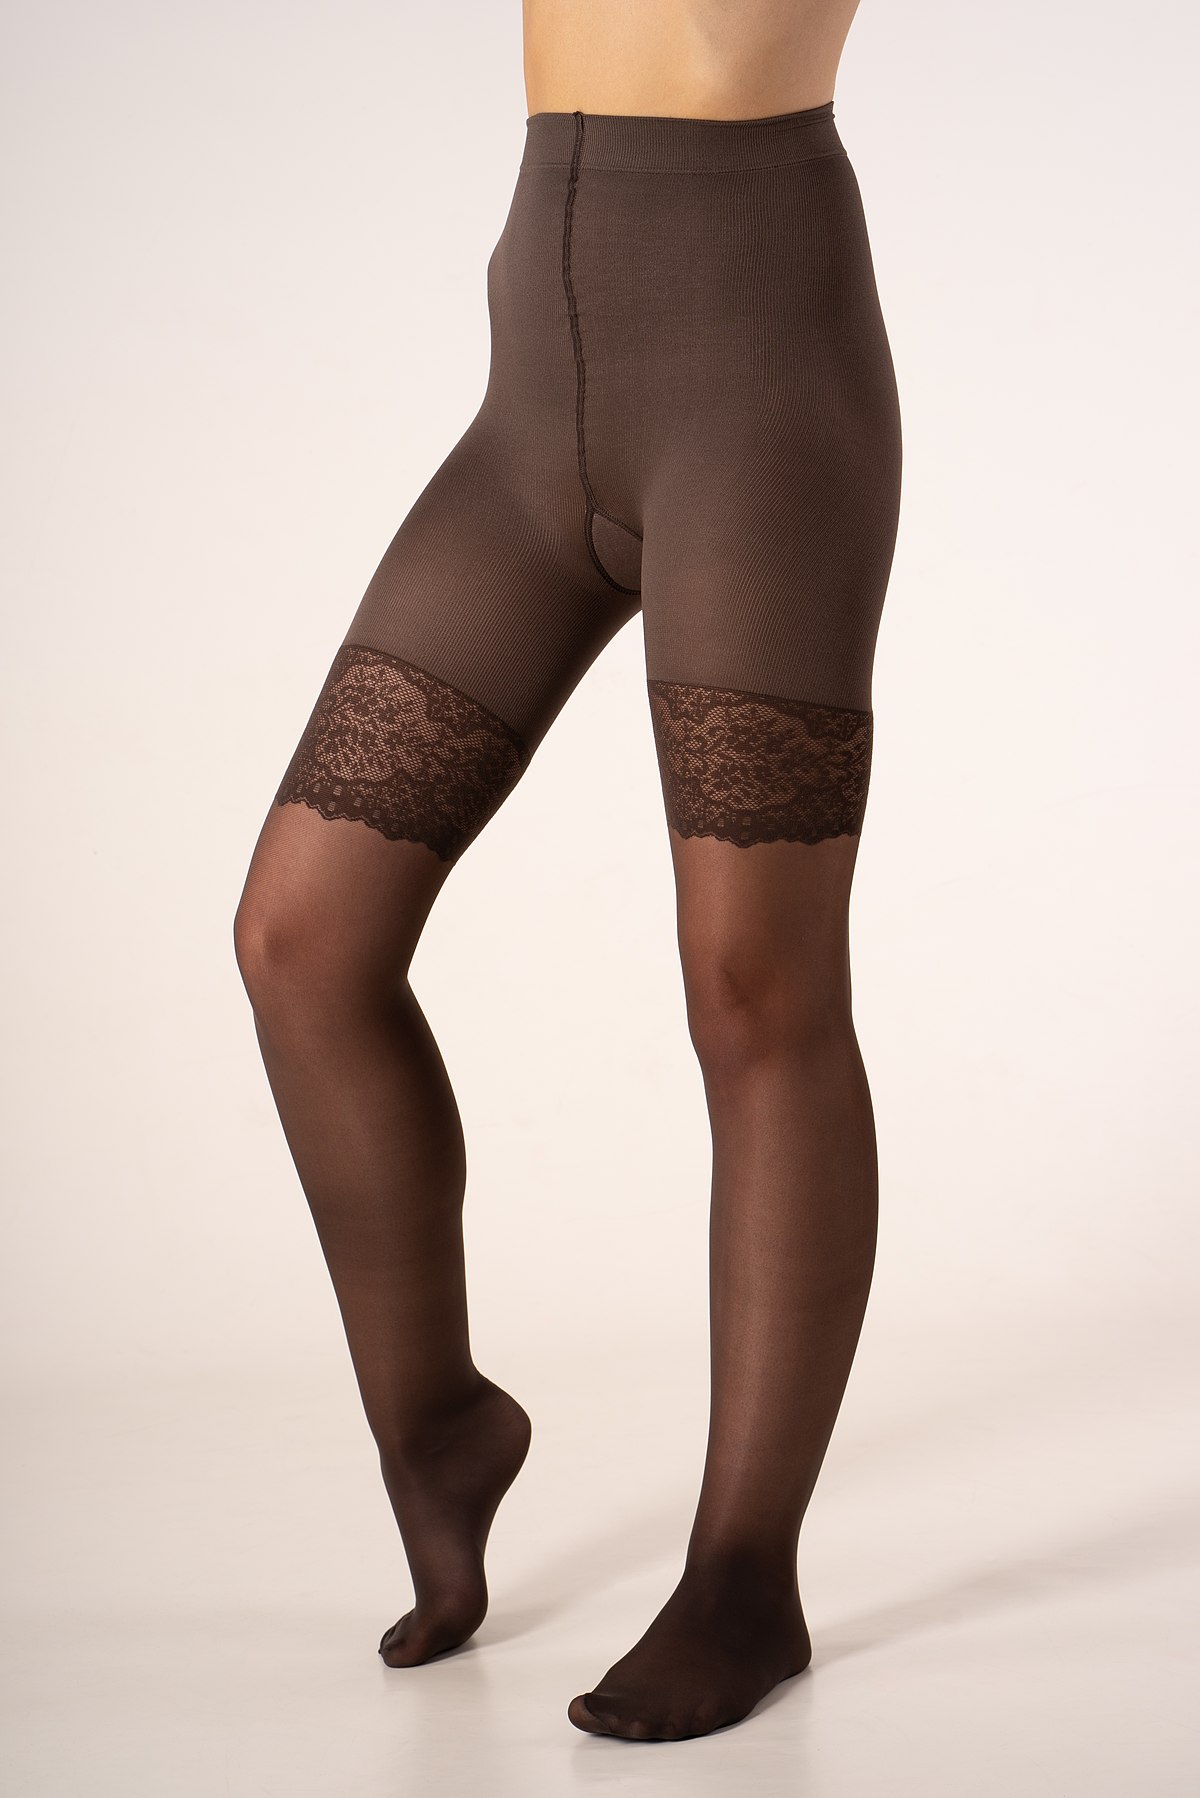 File:Tights (hosiery) panty overview (cropped).jpg - Wikimedia Commons